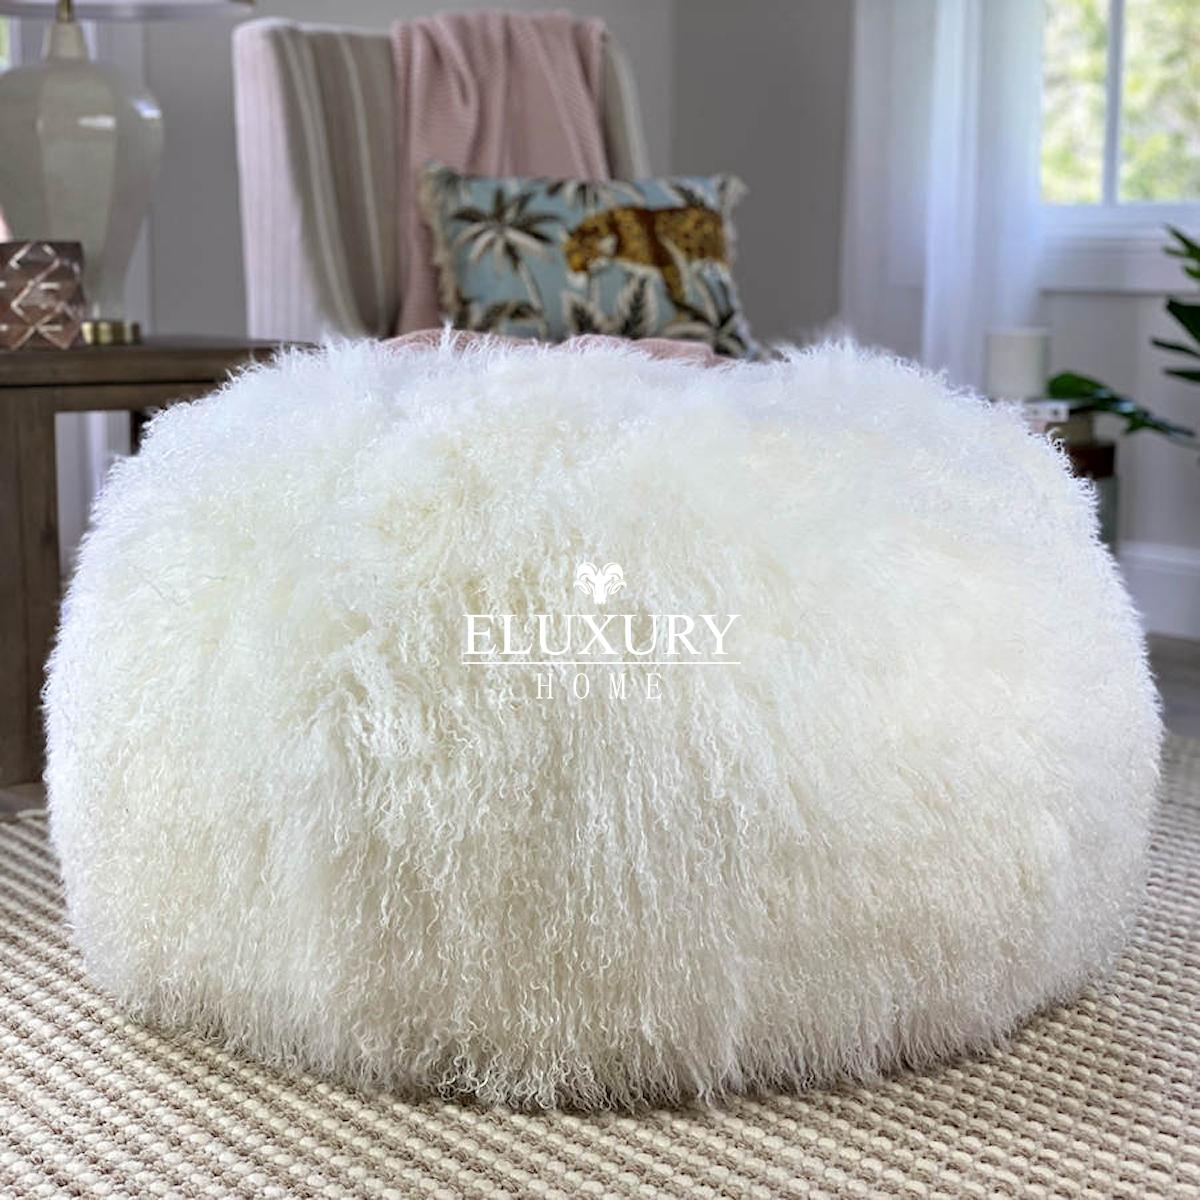 This round fur ottoman will be the wow factor that your decor needs. The snow white Mongolian fur ottoman will look and feel super lush in any interior setting. It features the most luxurious and silky fur wool that will grace a room with